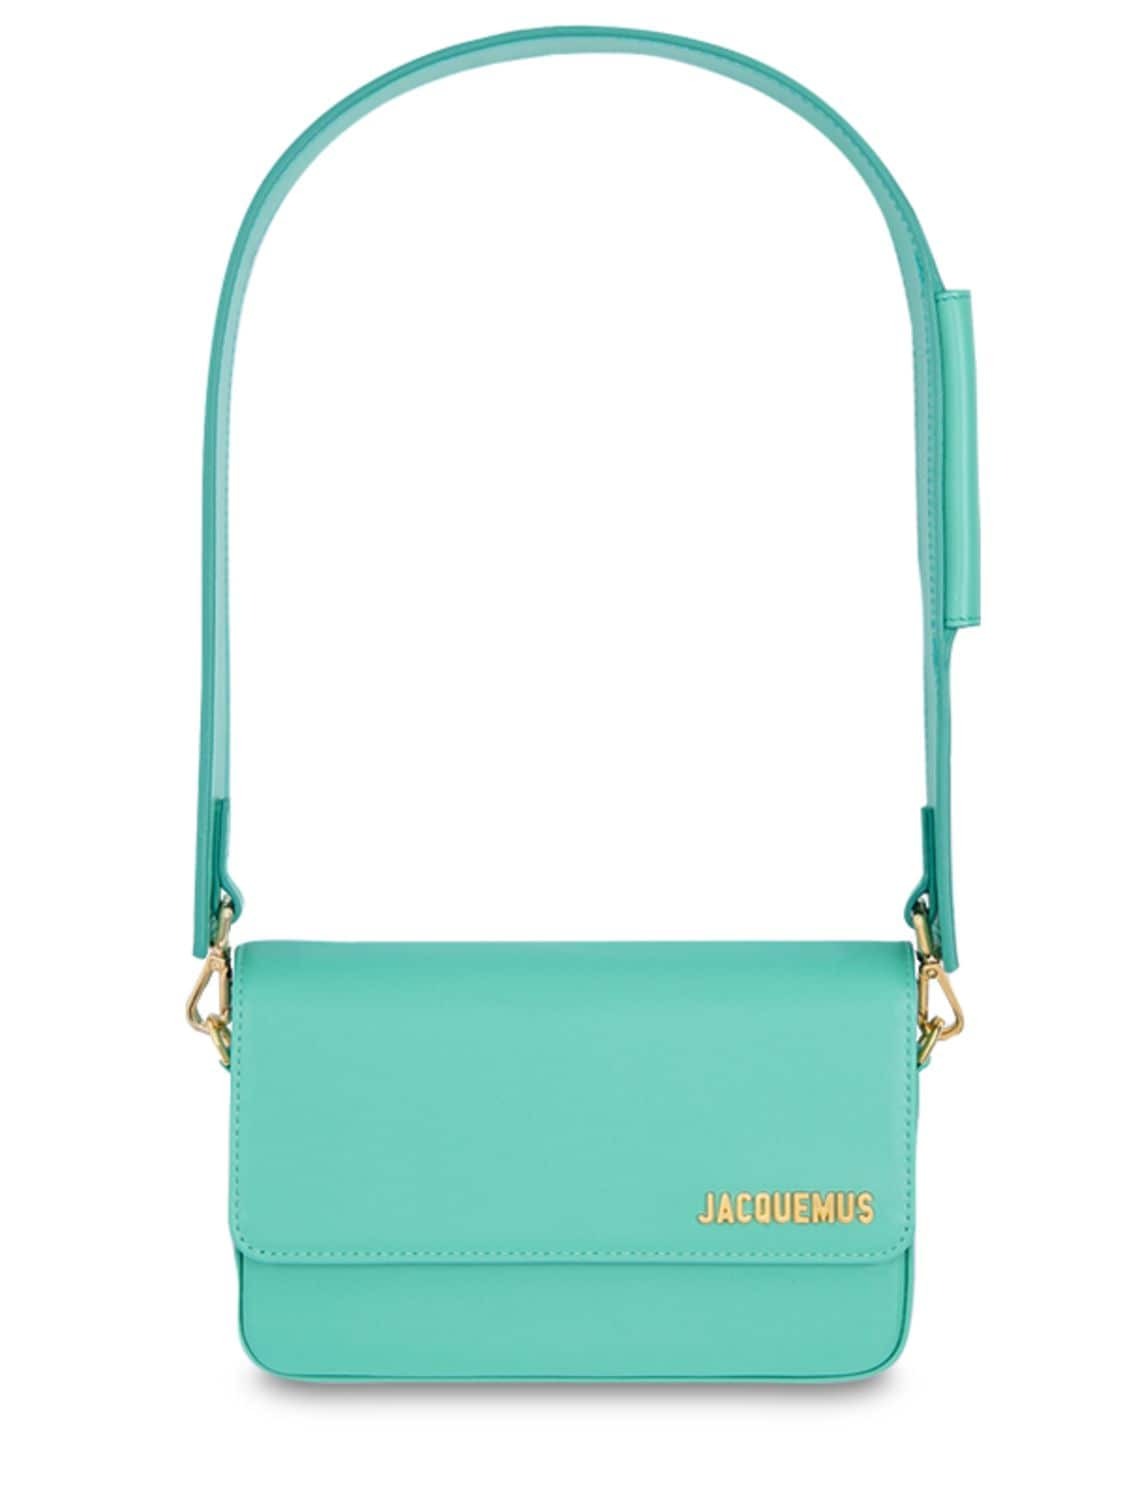 JACQUEMUS Le Carinu Leather Shoulder Bag in turquoise